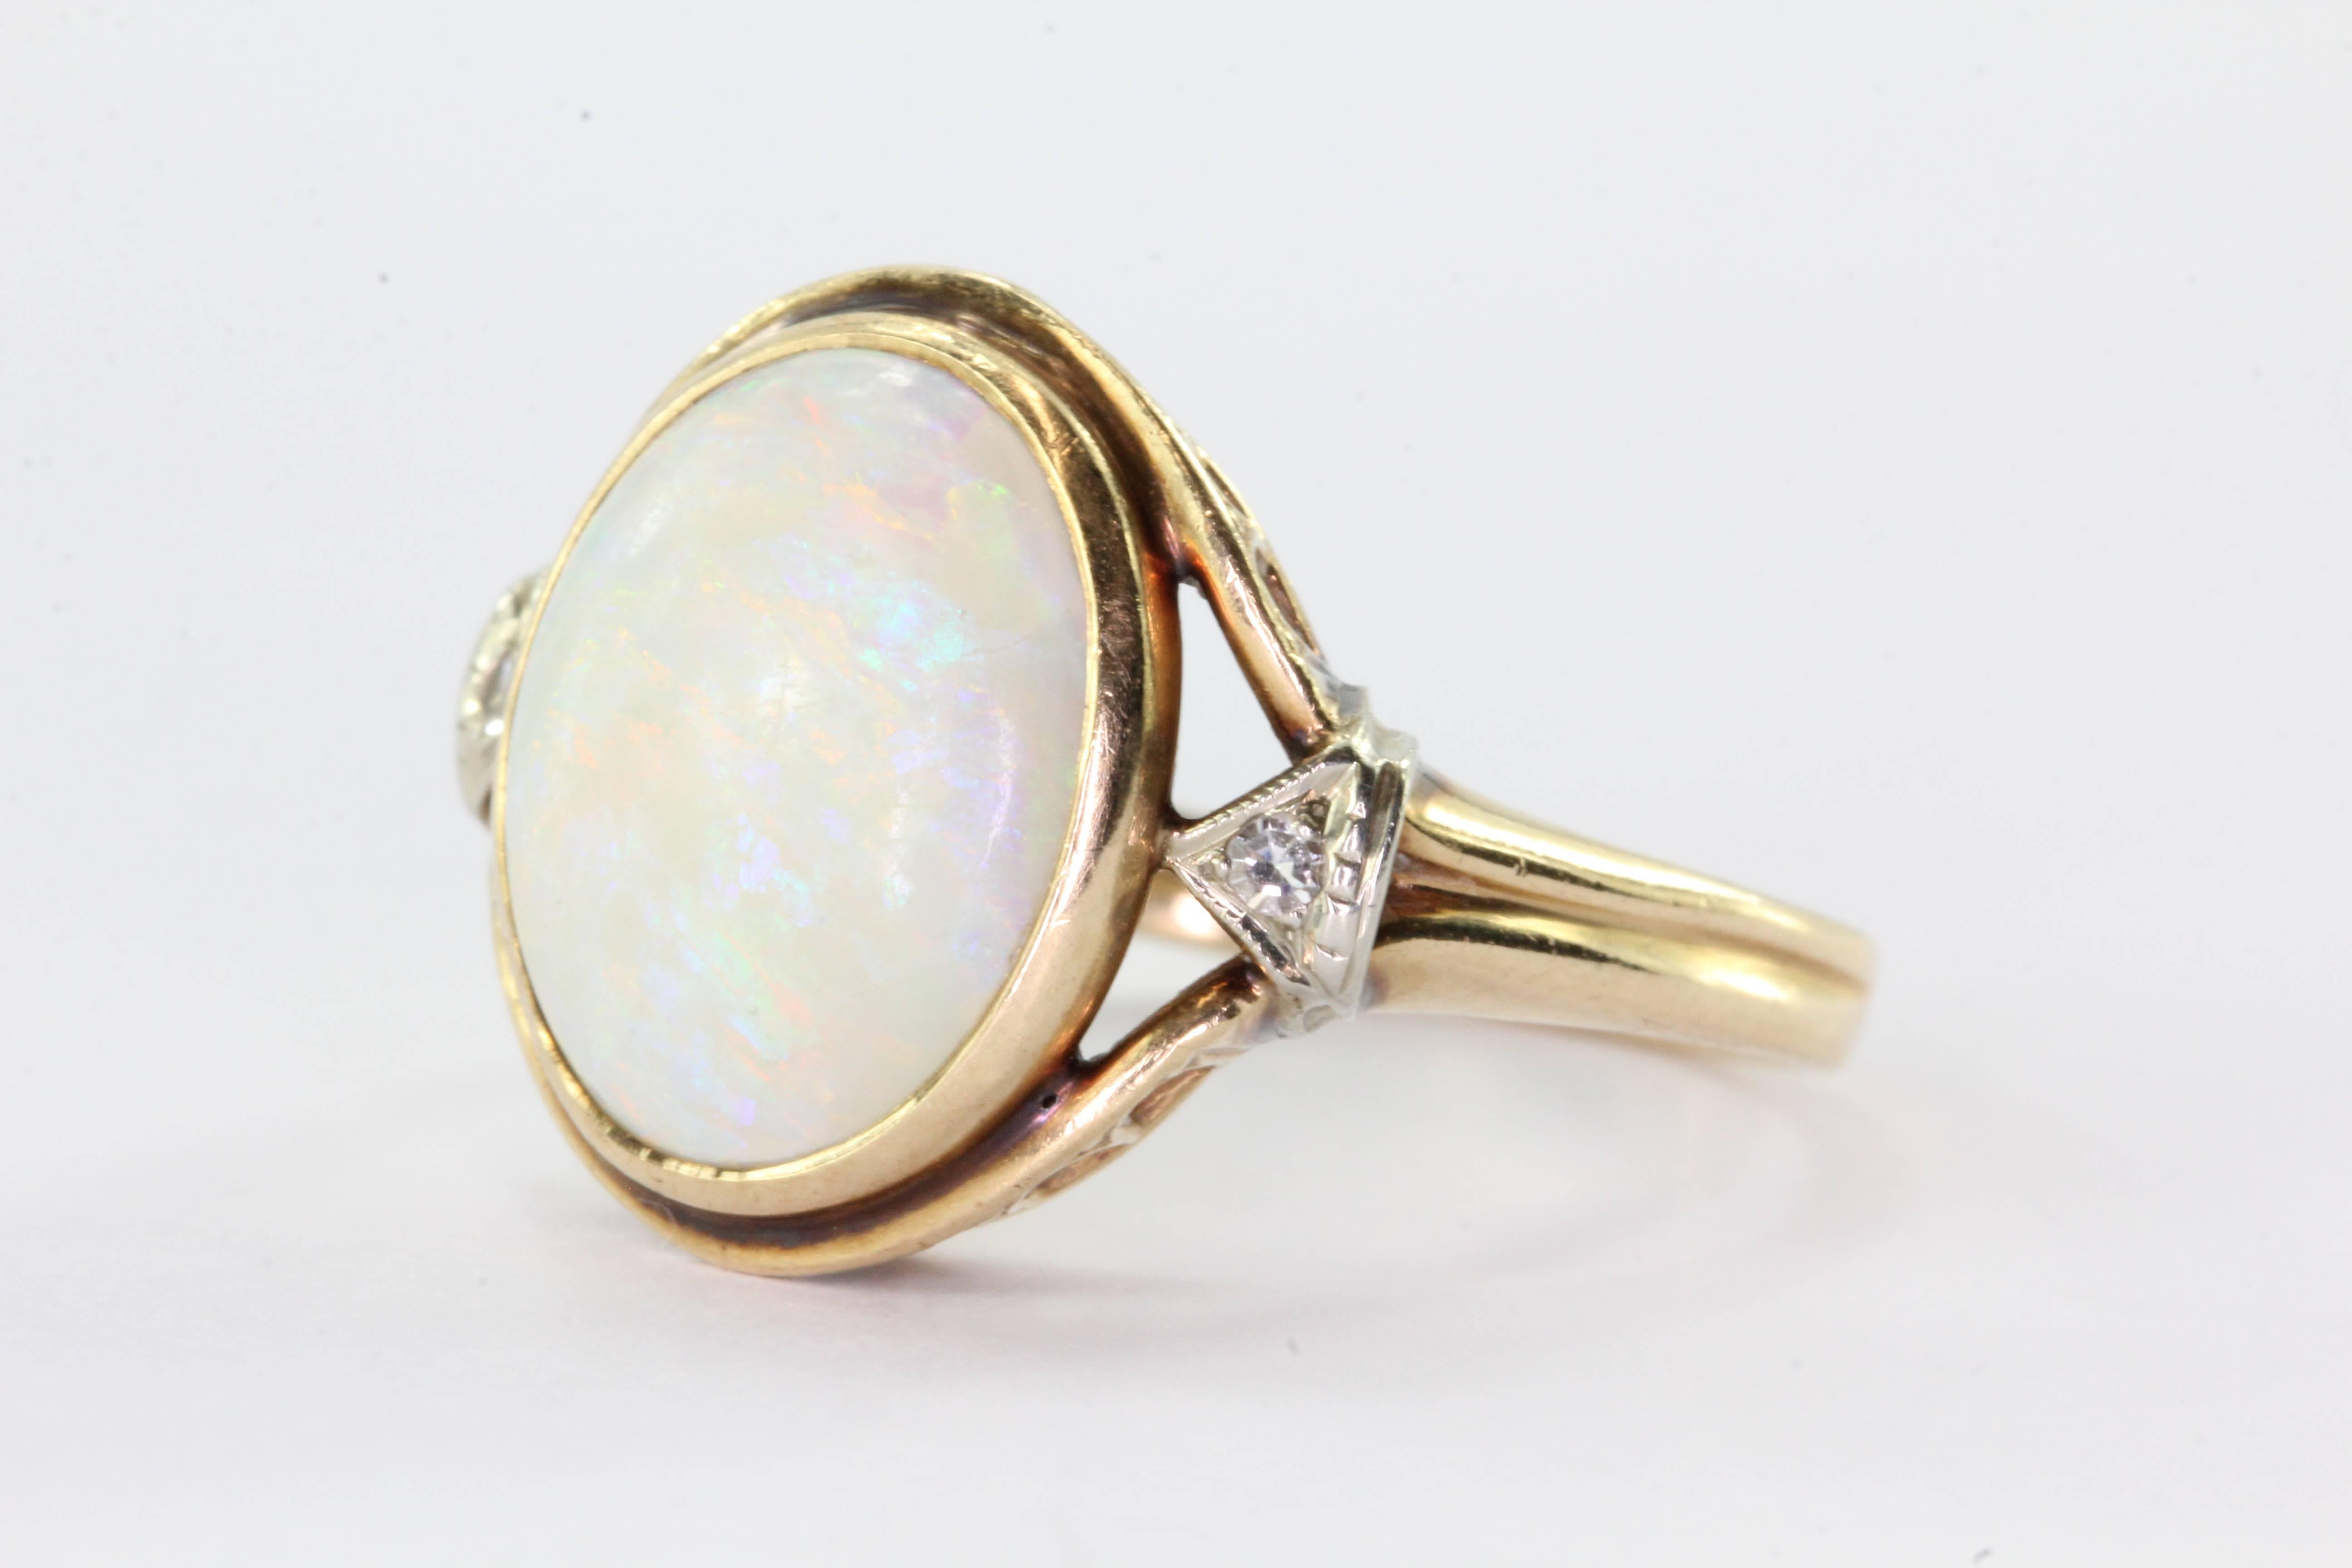 Antique Gothic Revival 14K Gold Opal & Diamond by Church & Co. The ring is in great antique estate condition and ready to wear. There are some signs of wear to the opal. The ring is hallmarked 14K and the makers mark for Church & Co of Newark NJ.